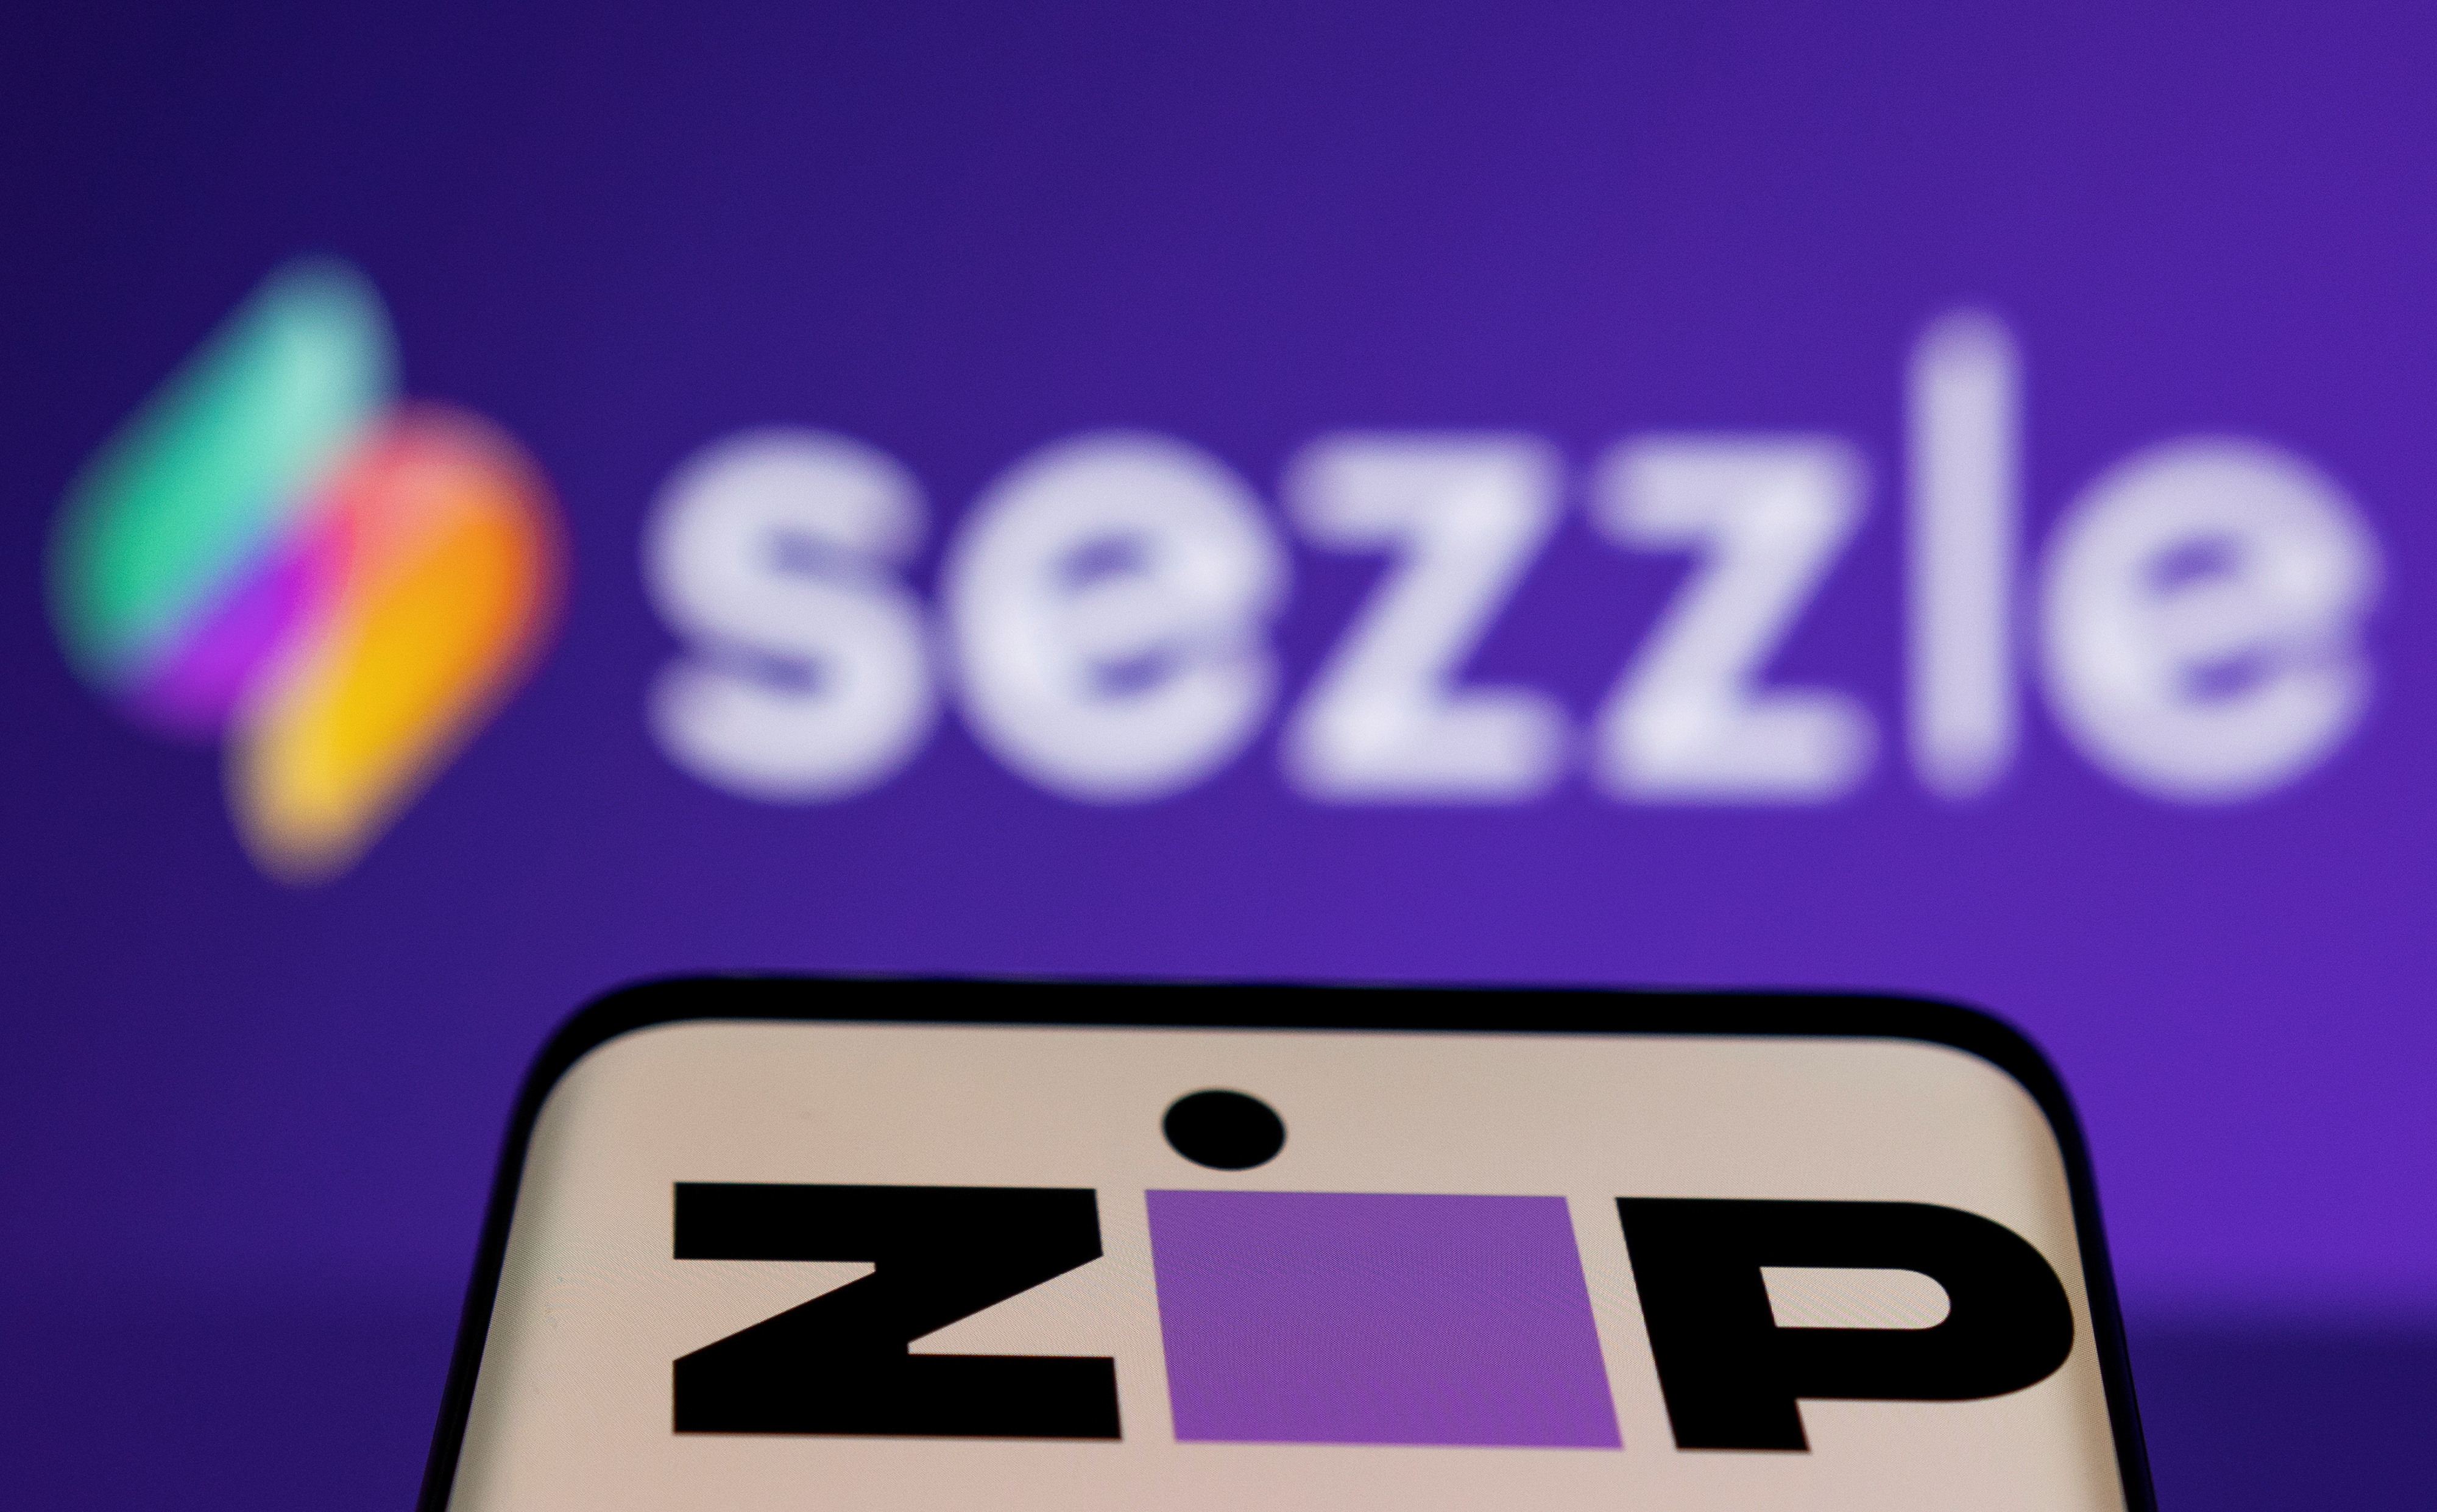 Illustration shows Sezzle and Zip logos